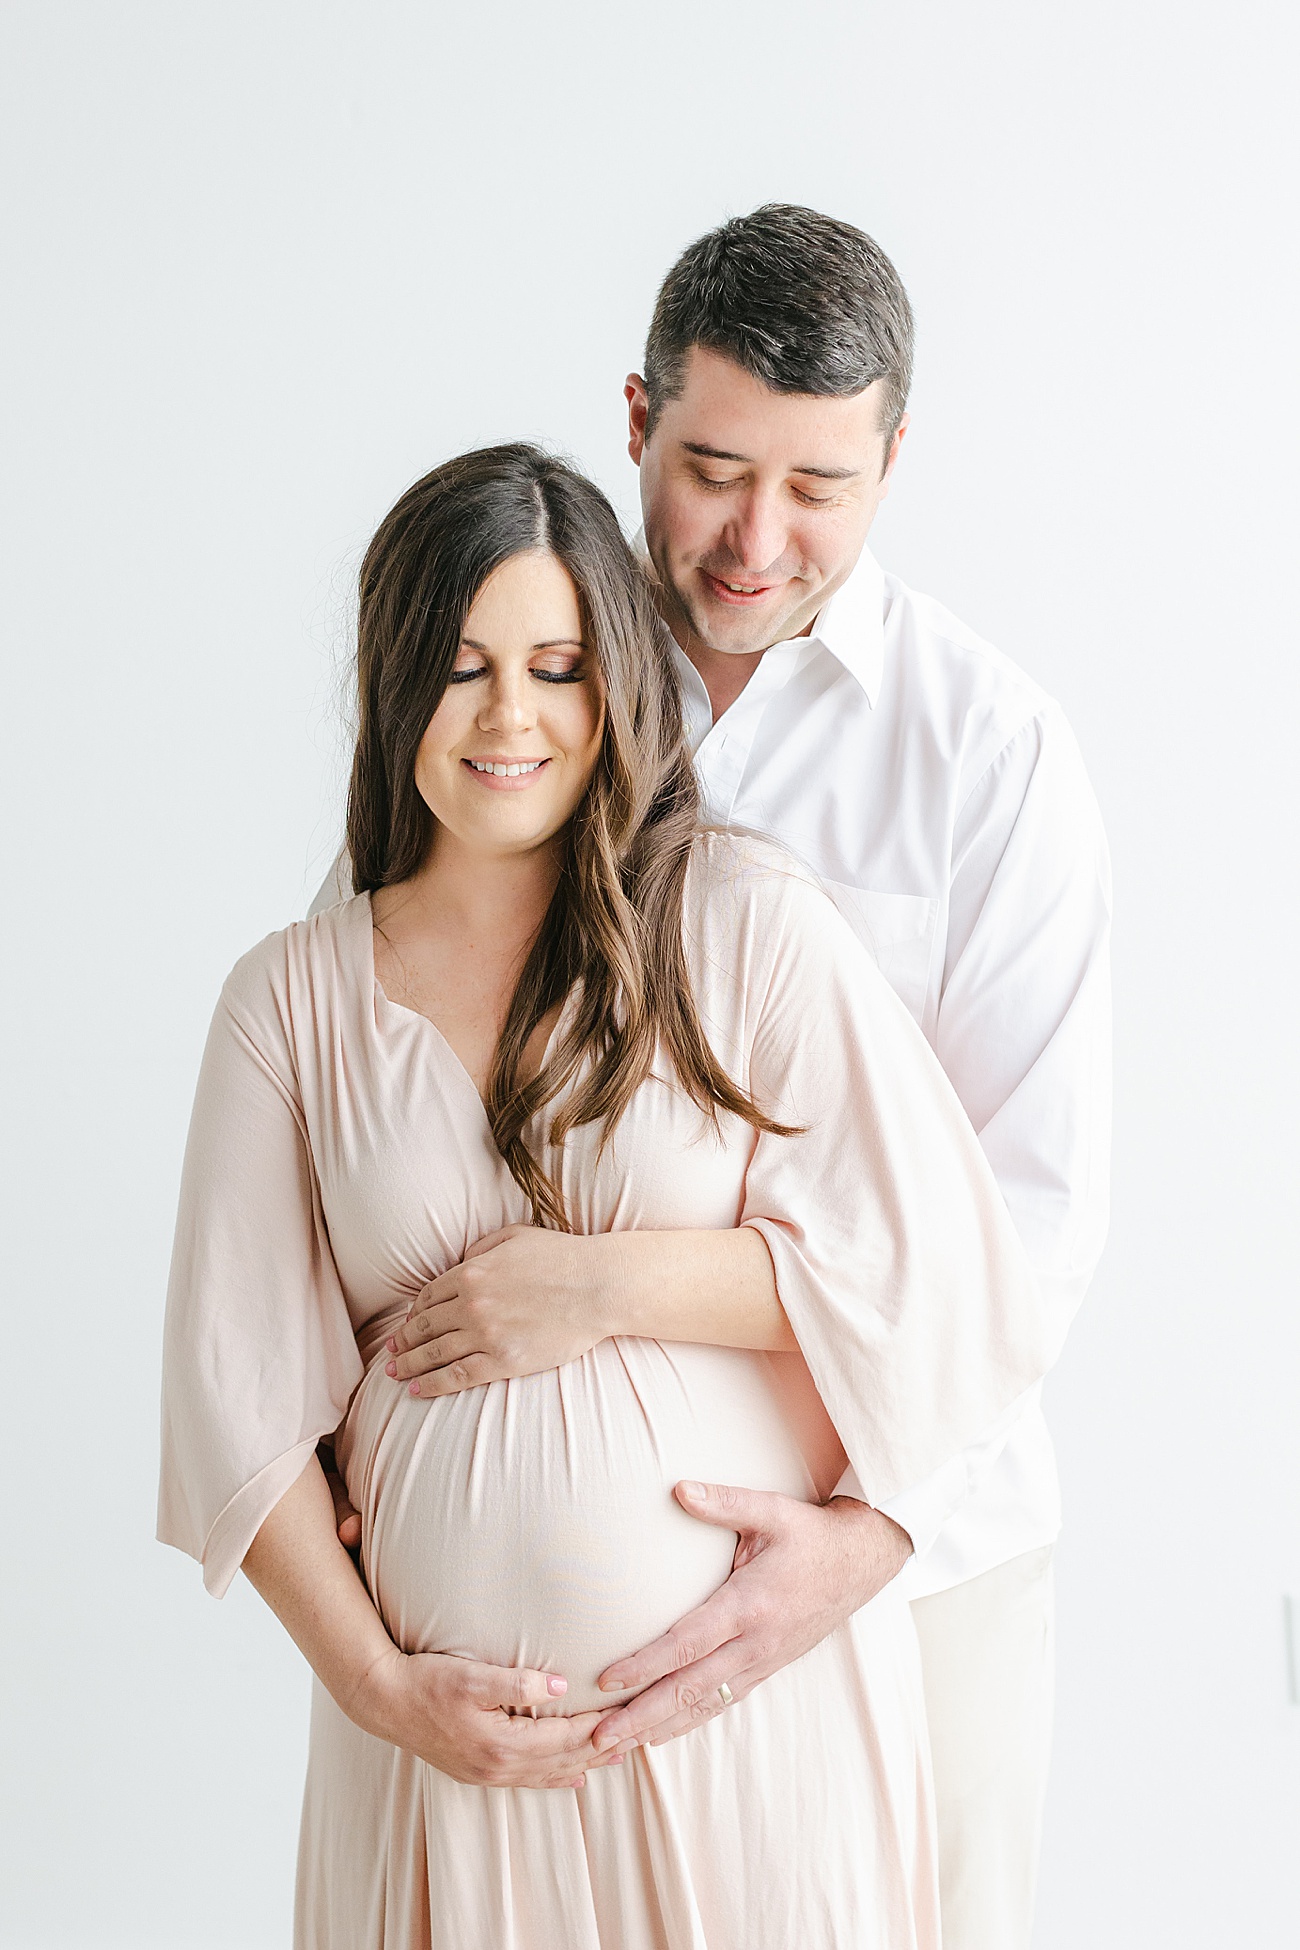 Sweet maternity pose as Dad stands behind Mom and hugs baby bump. Photo by Sana Ahmed Photography.